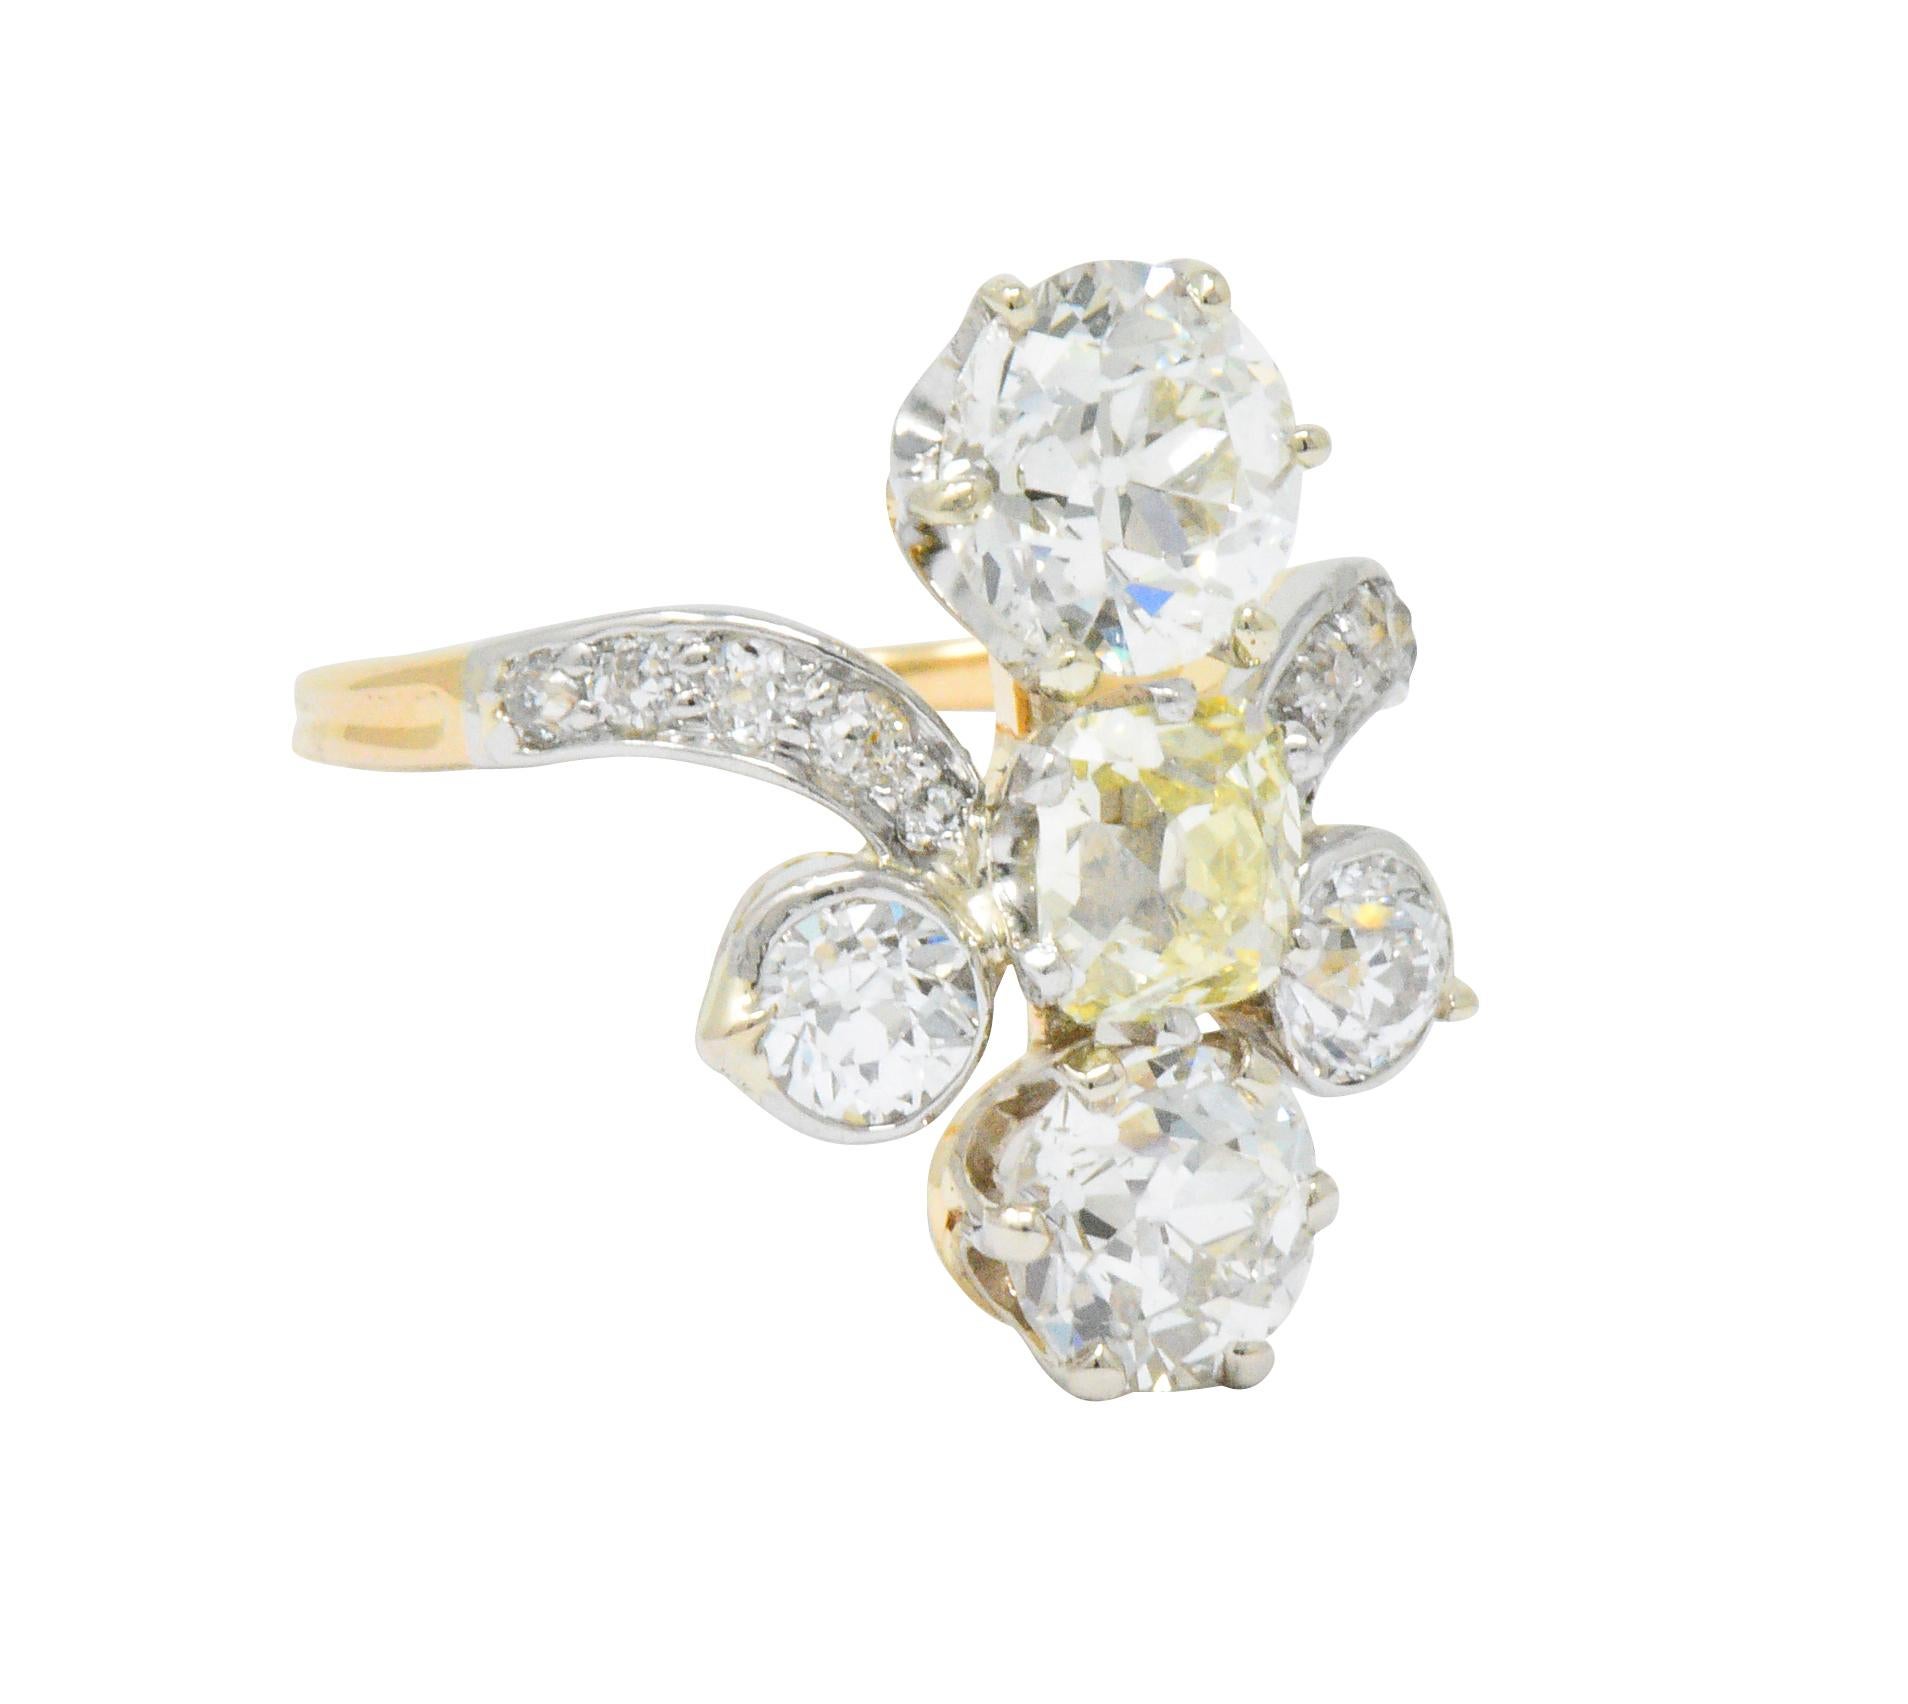 Centering an old square cushion cut diamond, light yellow color and VS clarity

With two old European cut diamonds weighing 1.40, 0.90 carats, J/K color and SI1 clarity

Accented with old mine and Swiss cut diamonds weighing approximately 0.80 carat